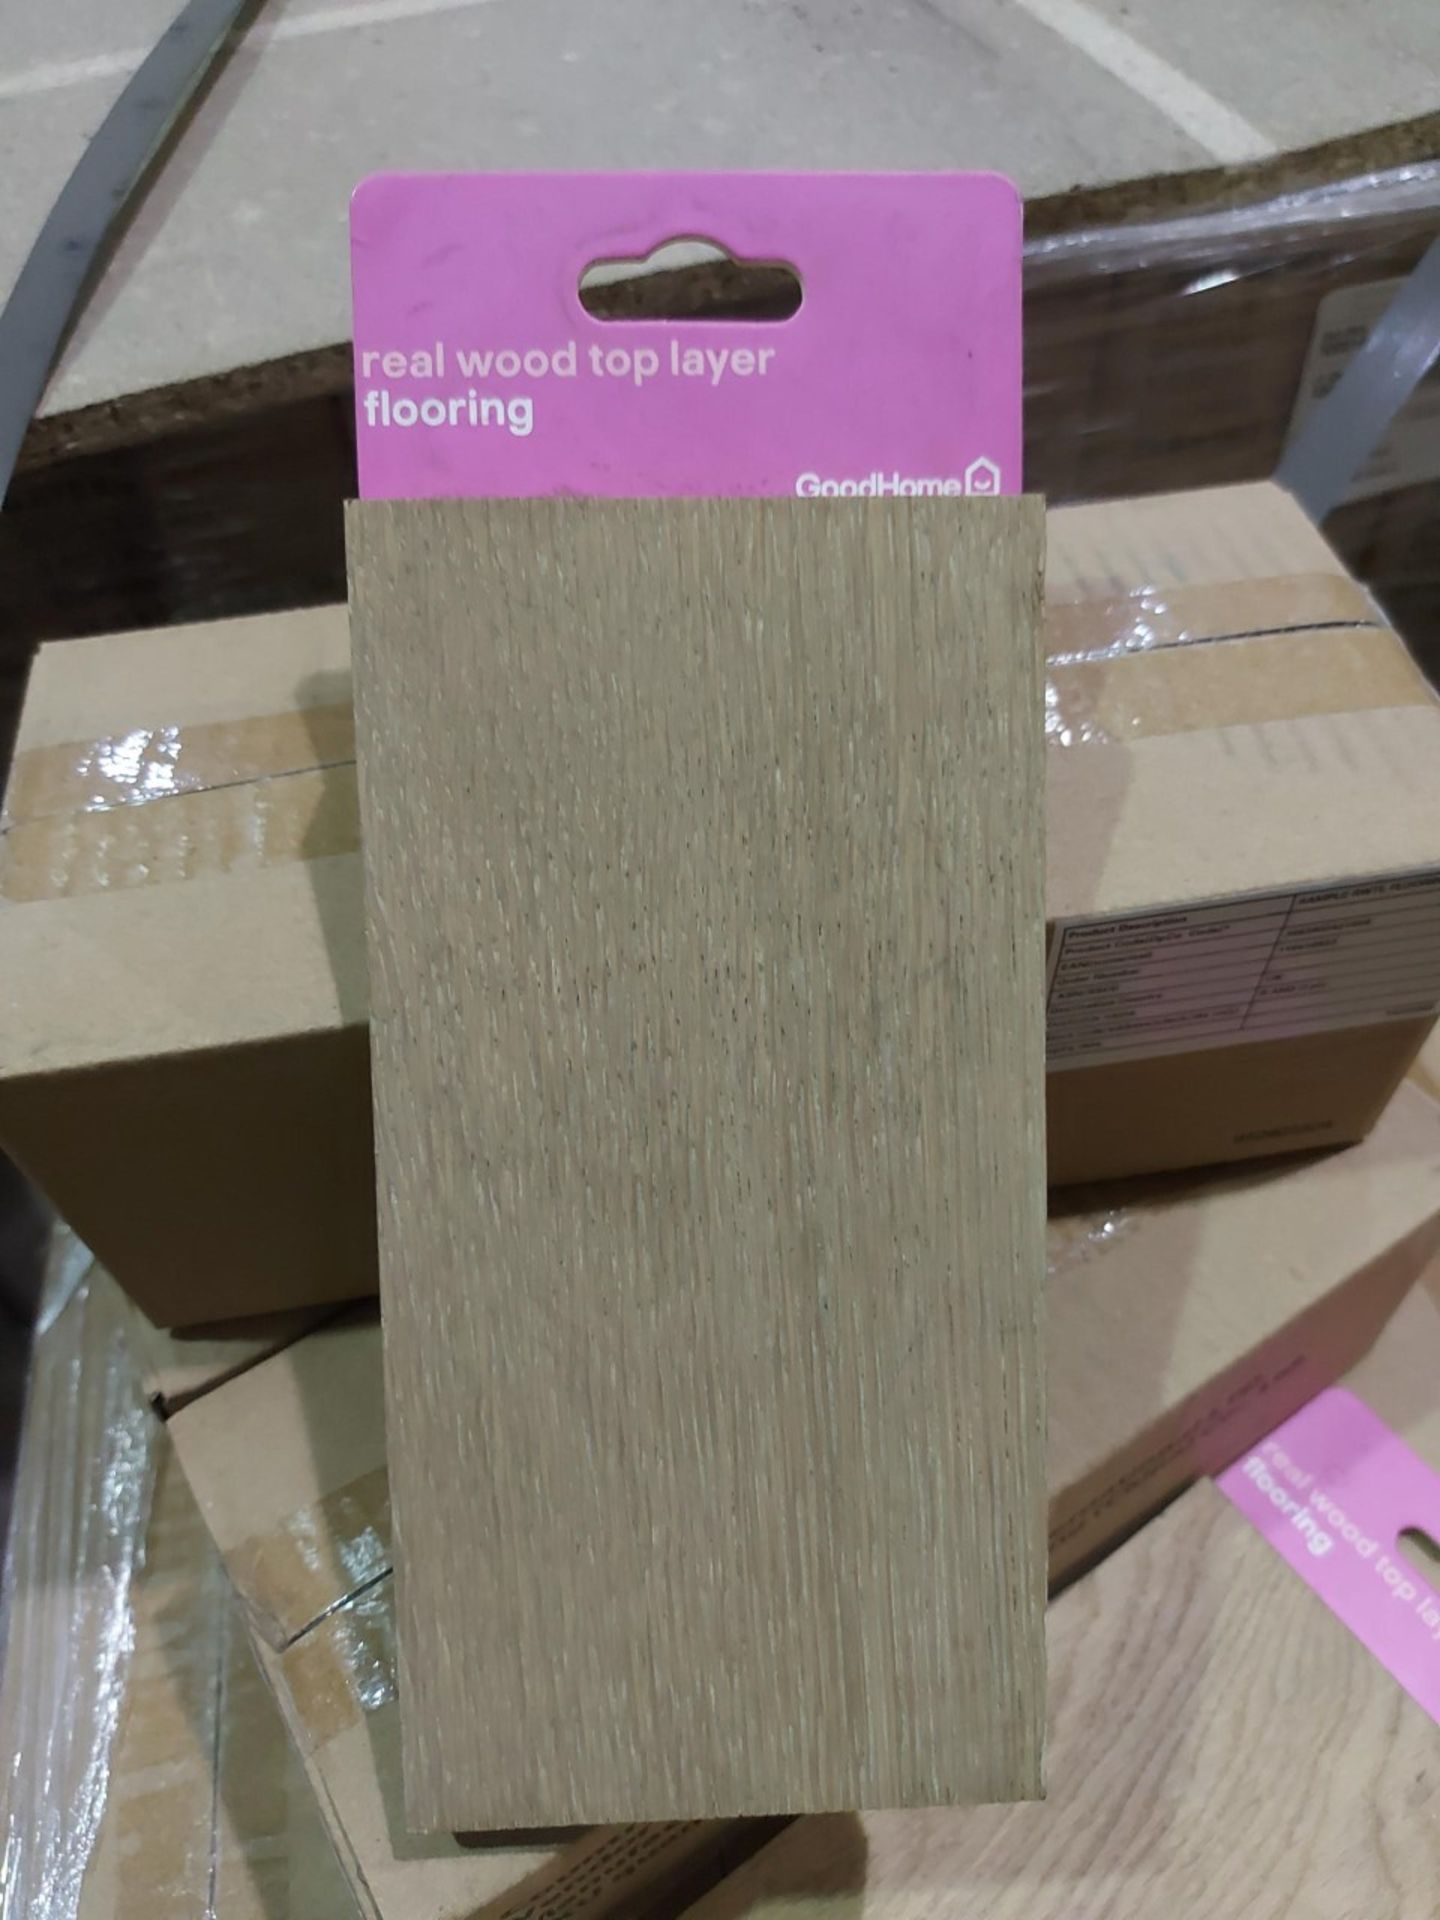 (Z255) PALLET TO CONTAIN 350 X PINGORA REAL WOOD TOP LAYER FLOORING PIECES